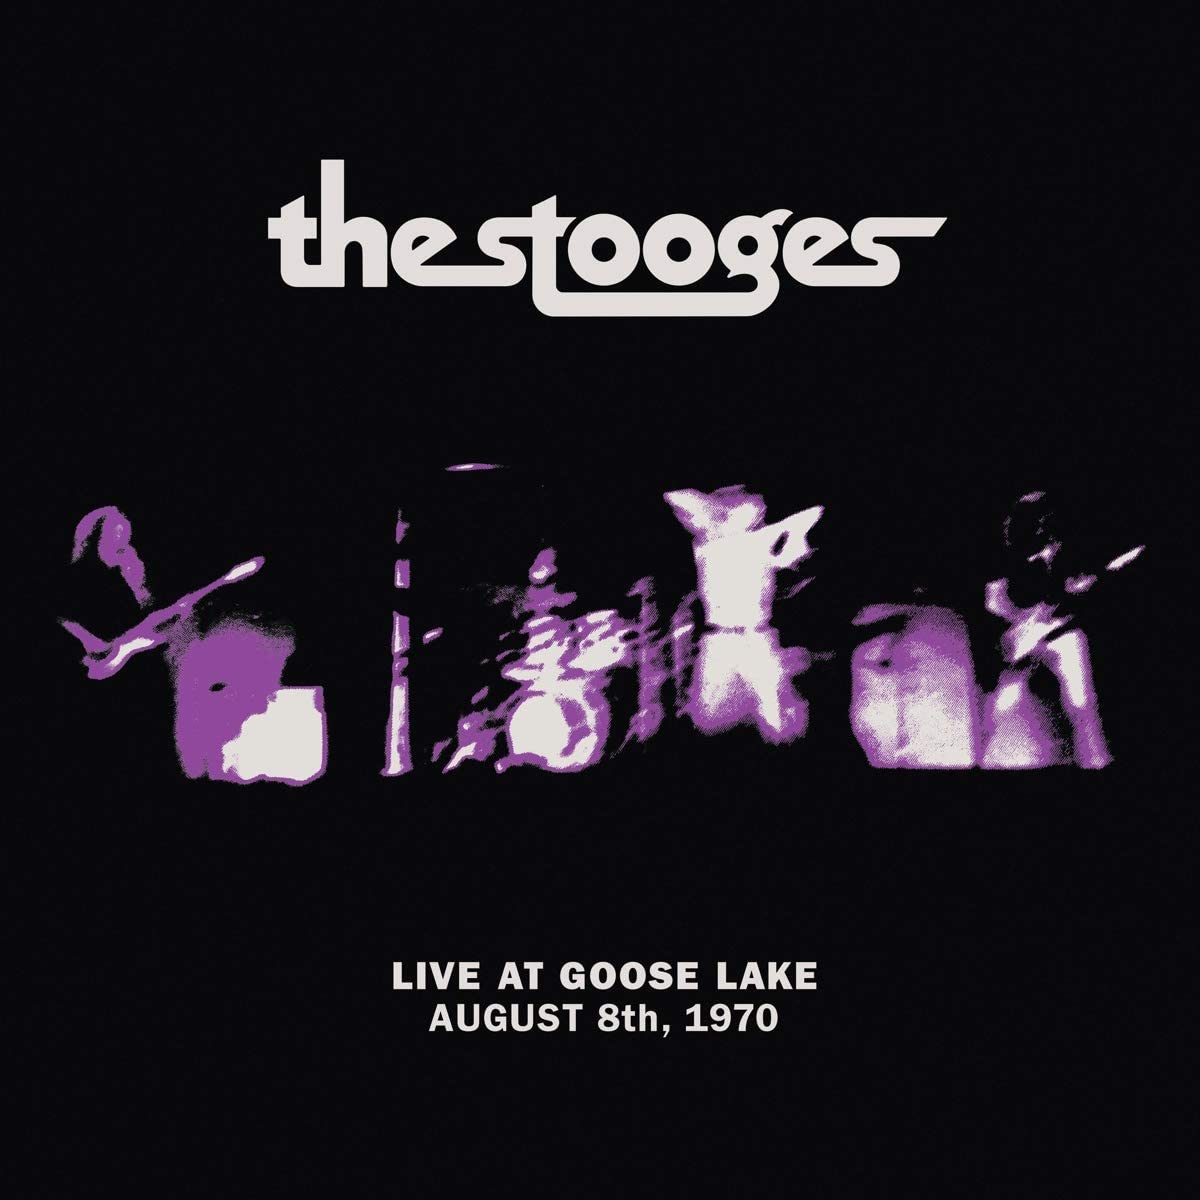 THE STOOGES - Live at Goose Lake: August 8th 1970 - LP - Vinyl